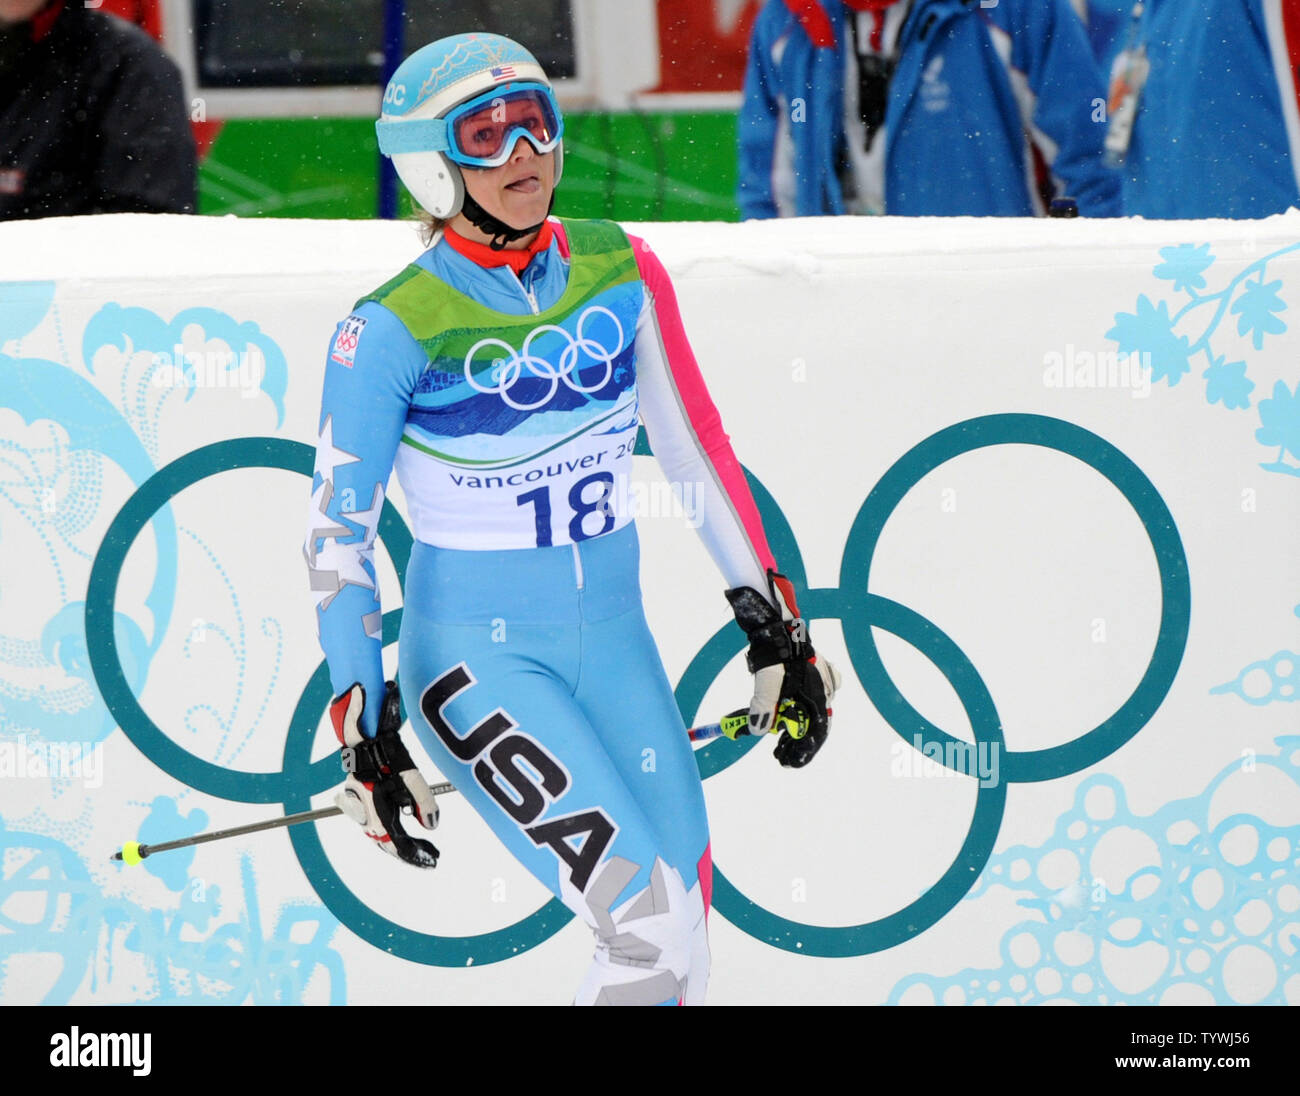 A dejected USA's Julia Mancuso looks at her slow time after the first run of the Women's Giant Slalom at Whistler Creekside at the Winter Olympics on February 24, 2010.  Mancuso had to restart after teammate Lindsey Vonn fell on the course.       UPI/Pat Benic Stock Photo